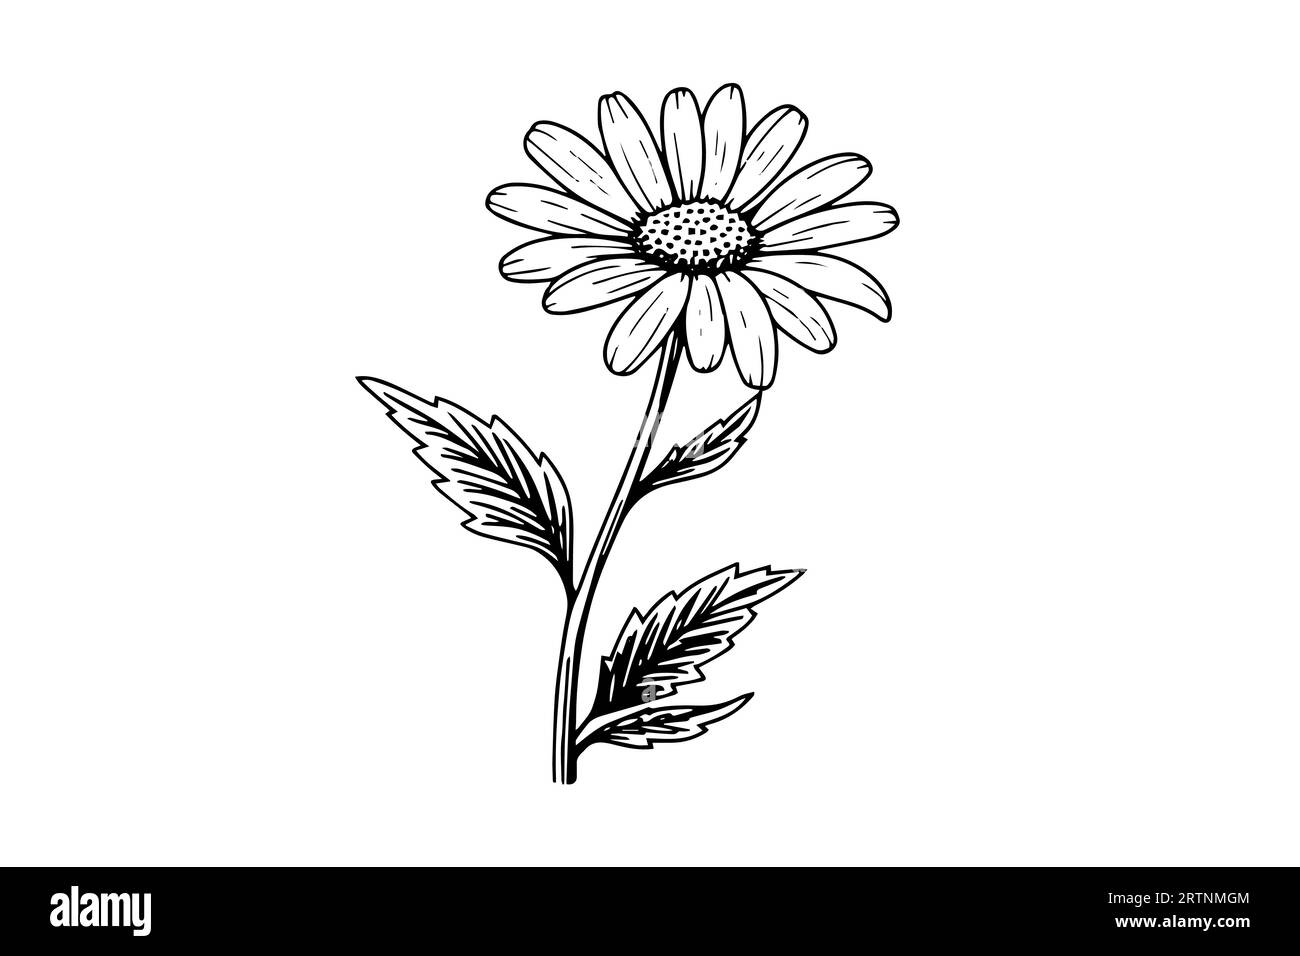 Hand drawn chamomile ink sketch. Daisy flower engraving vector illustration. Stock Vector